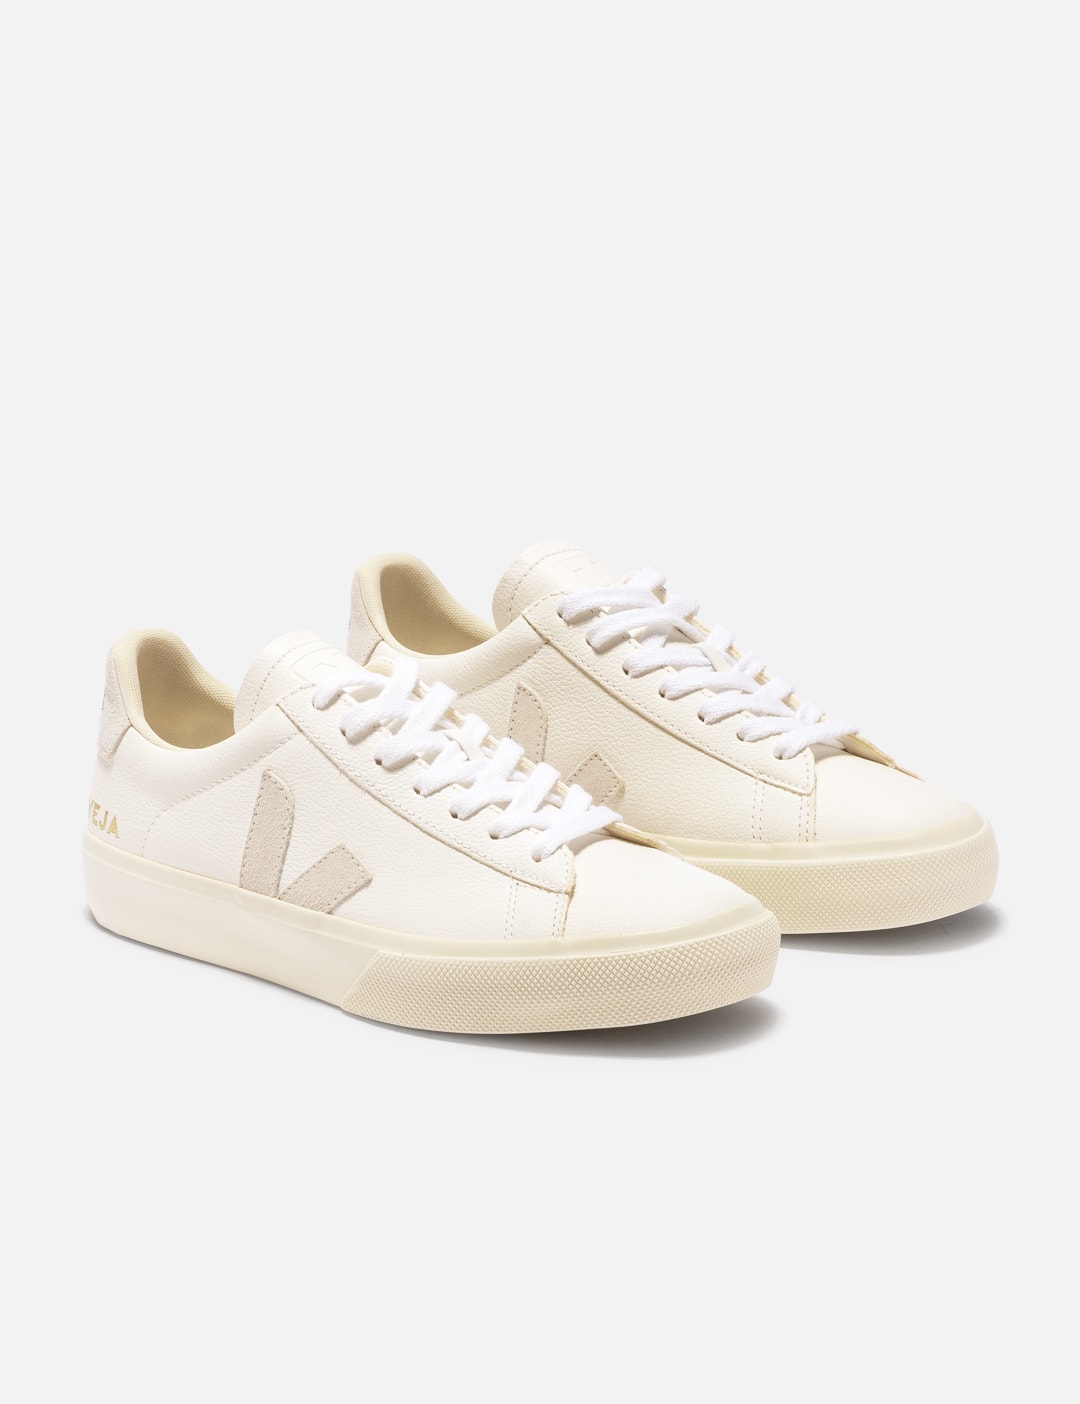 Veja - CAMPO CHROMEFREE LEATHER WHITE NATURAL | HBX - Globally Curated ...